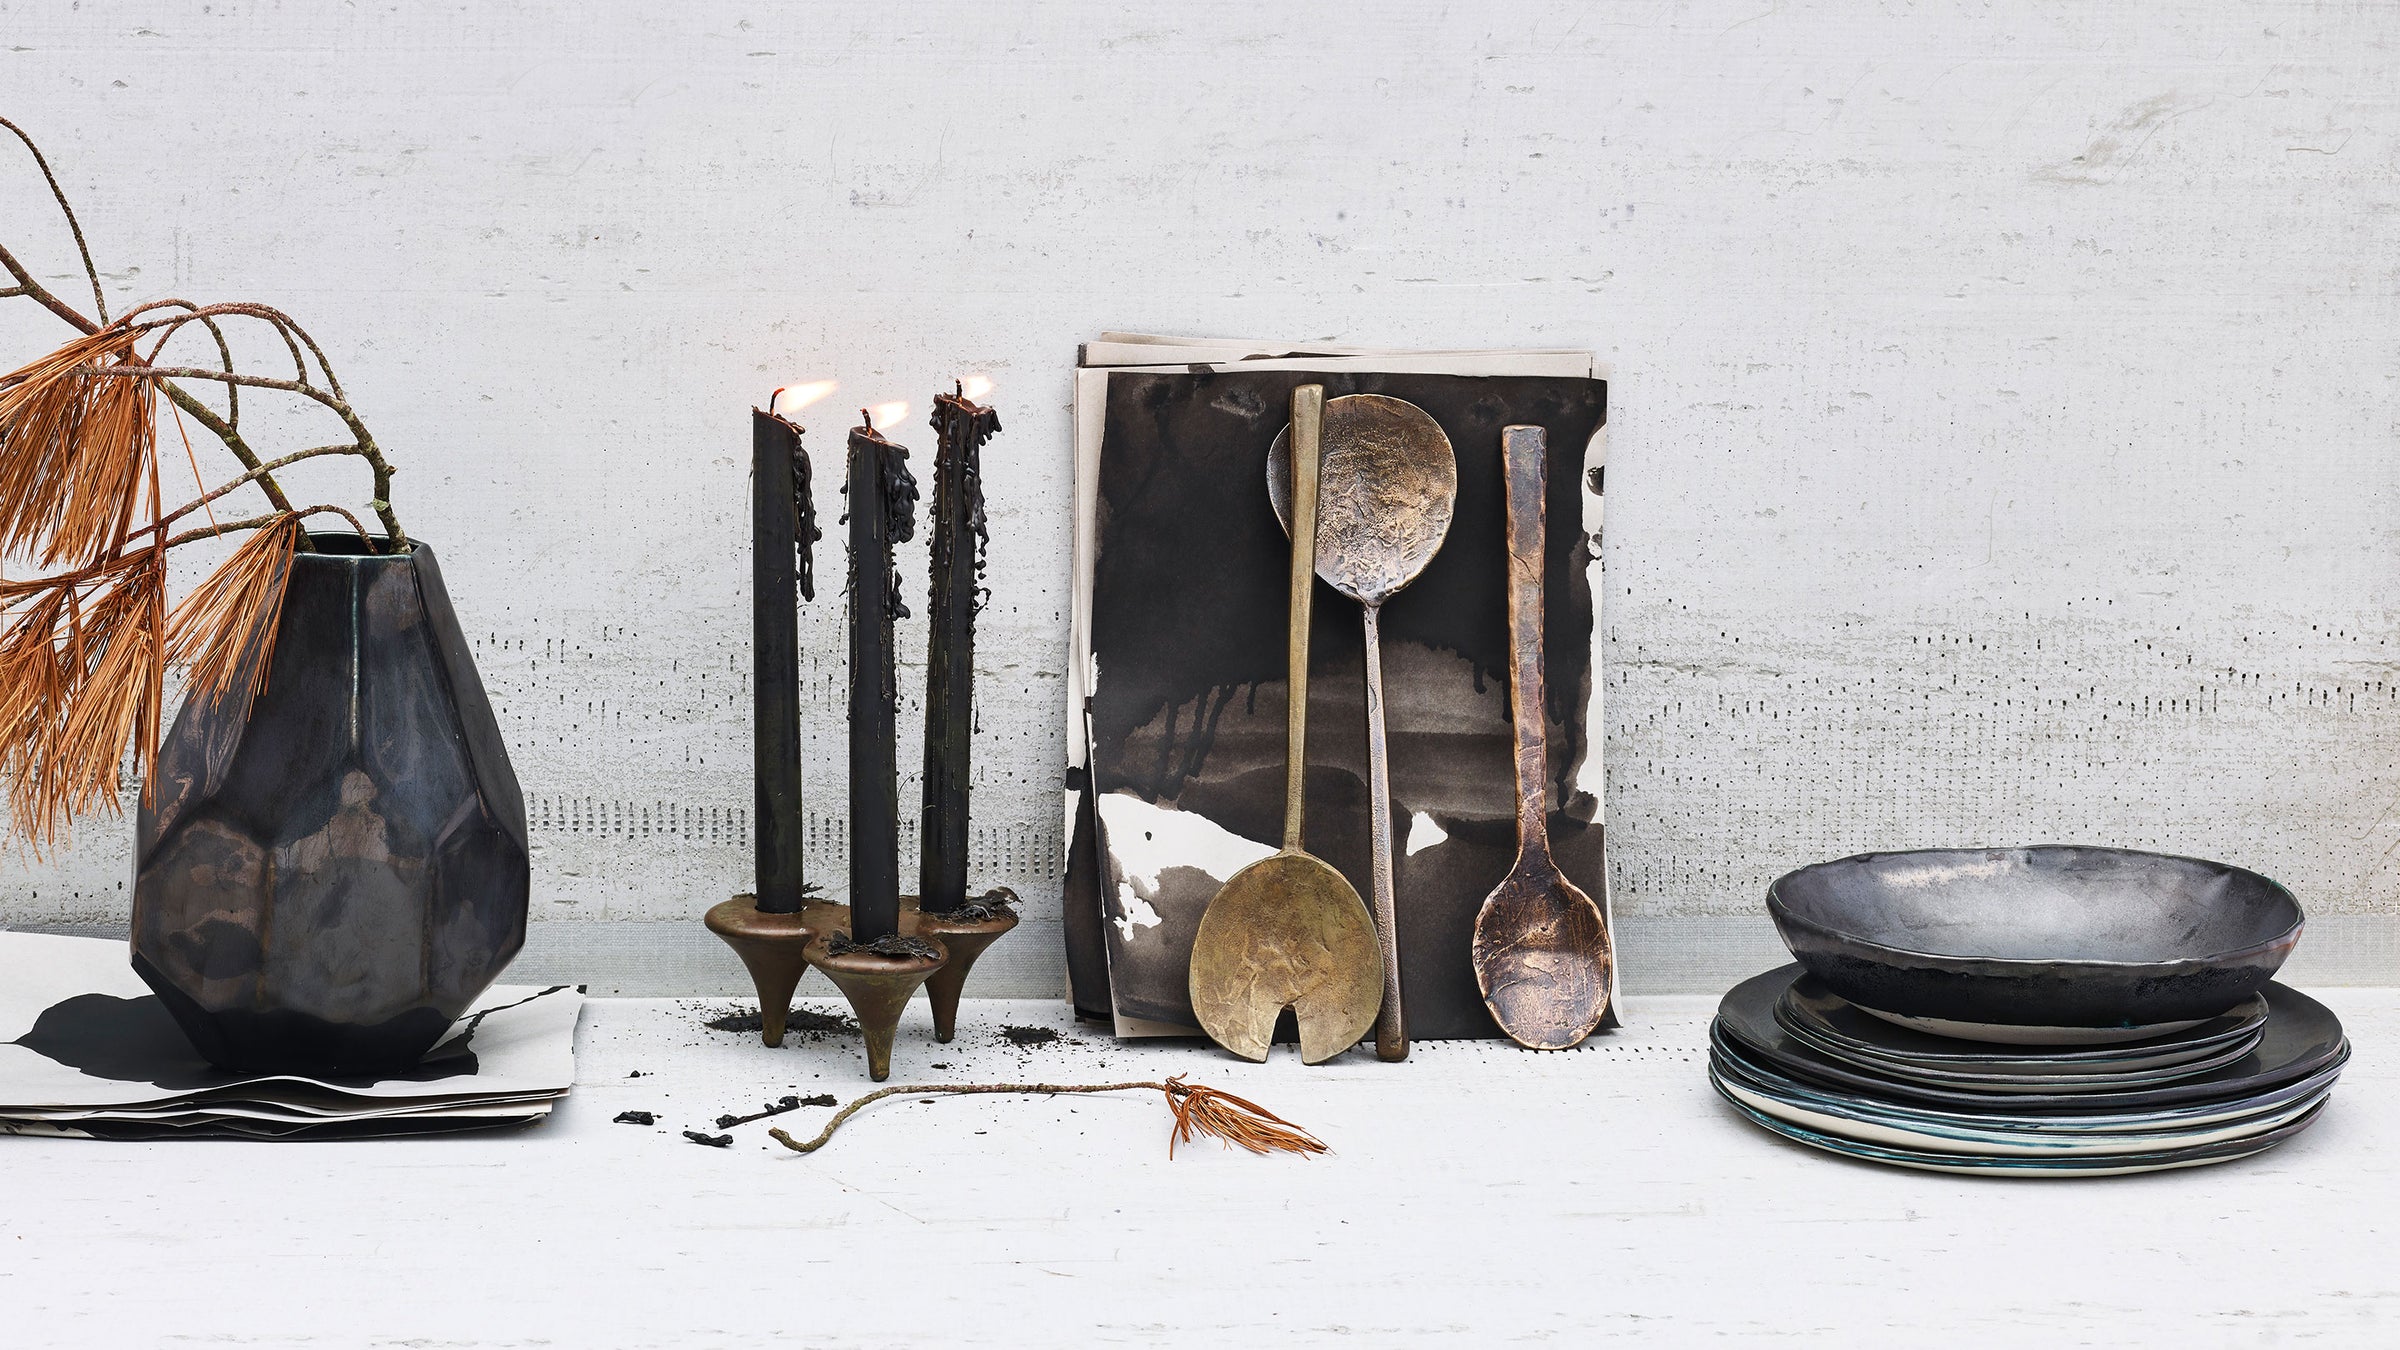 Artisan handcast bronze candlesticks, handcast bronze serveware and hand cast bronze spoon with black candles and black ceramic plates and vase on concrete background with pine needles